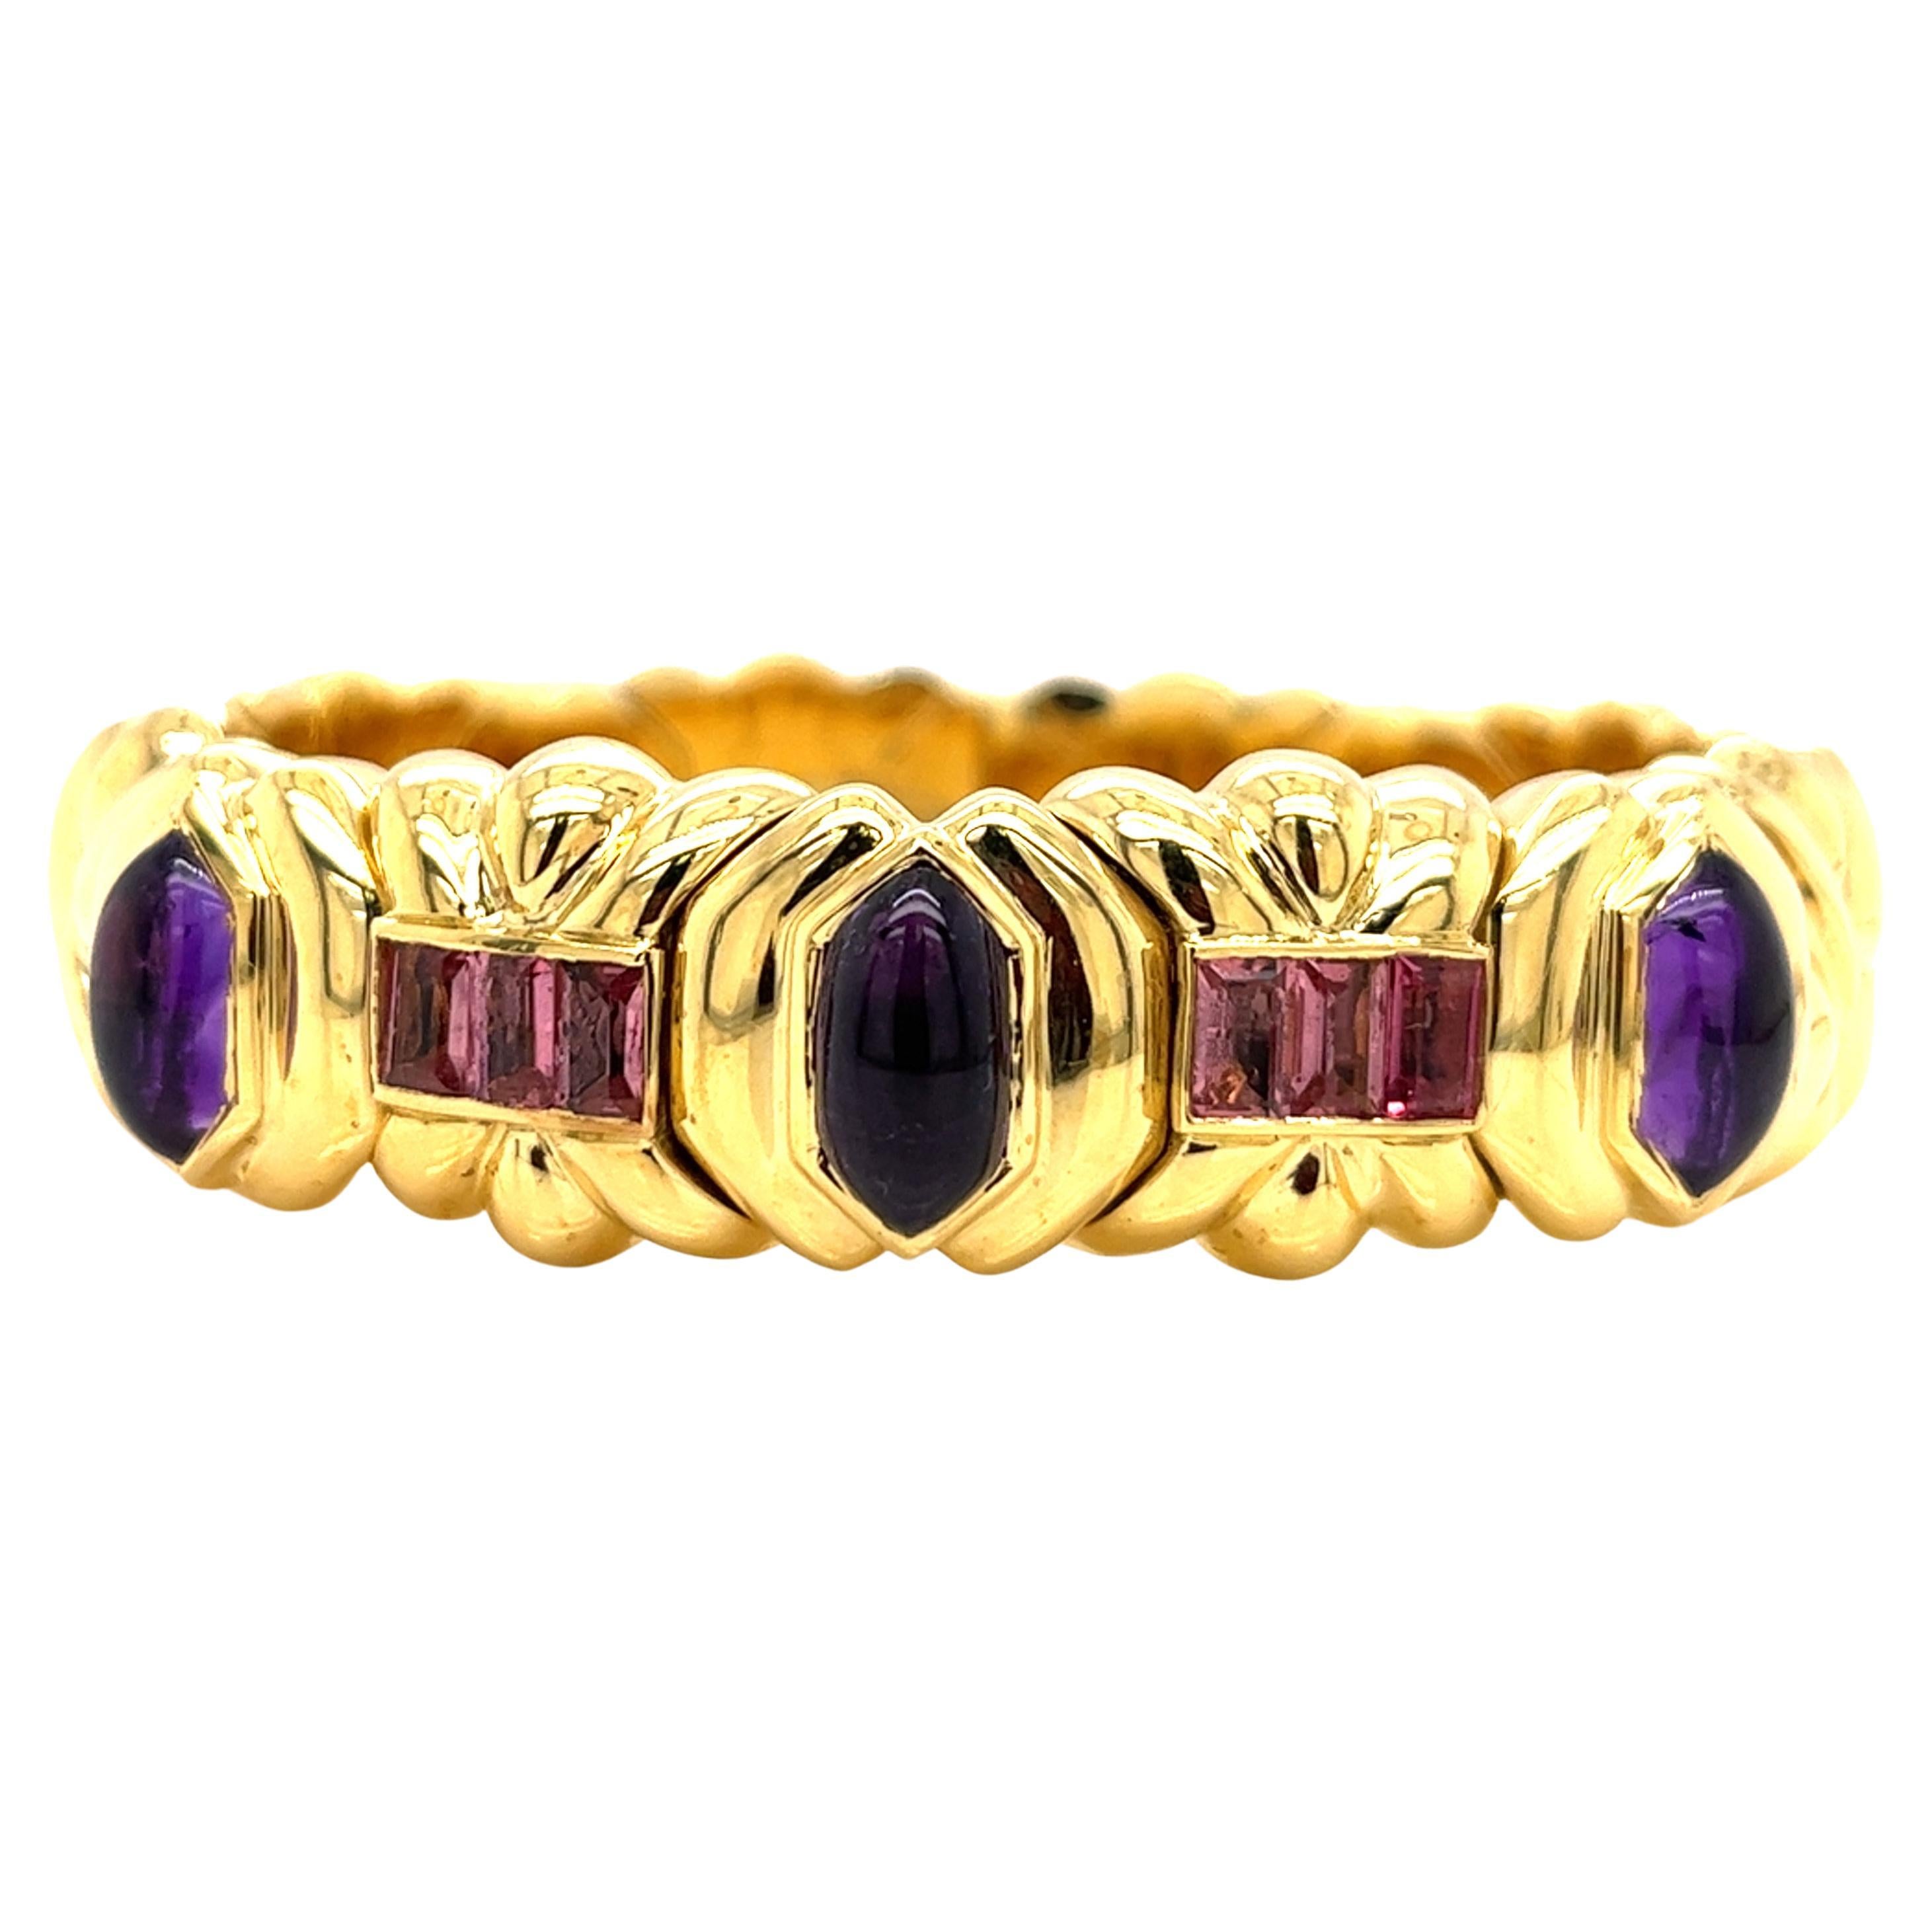 18Kt Yellow Gold Bracelet with Amethyst and Tourmaline. Total Weights 72 grams For Sale